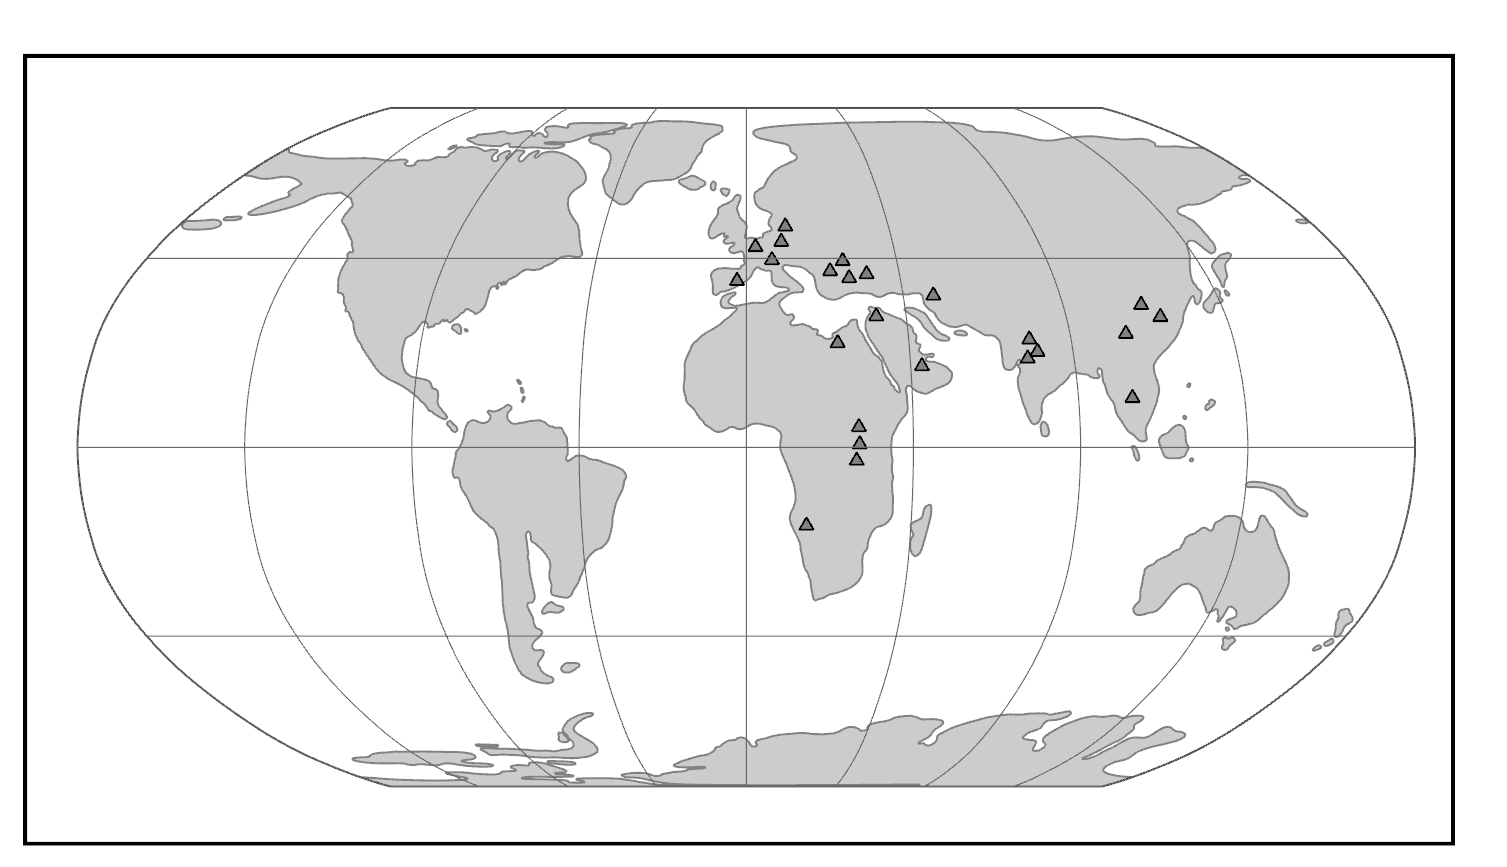 Map of the world in the Miocene, highlighting fossil ape localities.